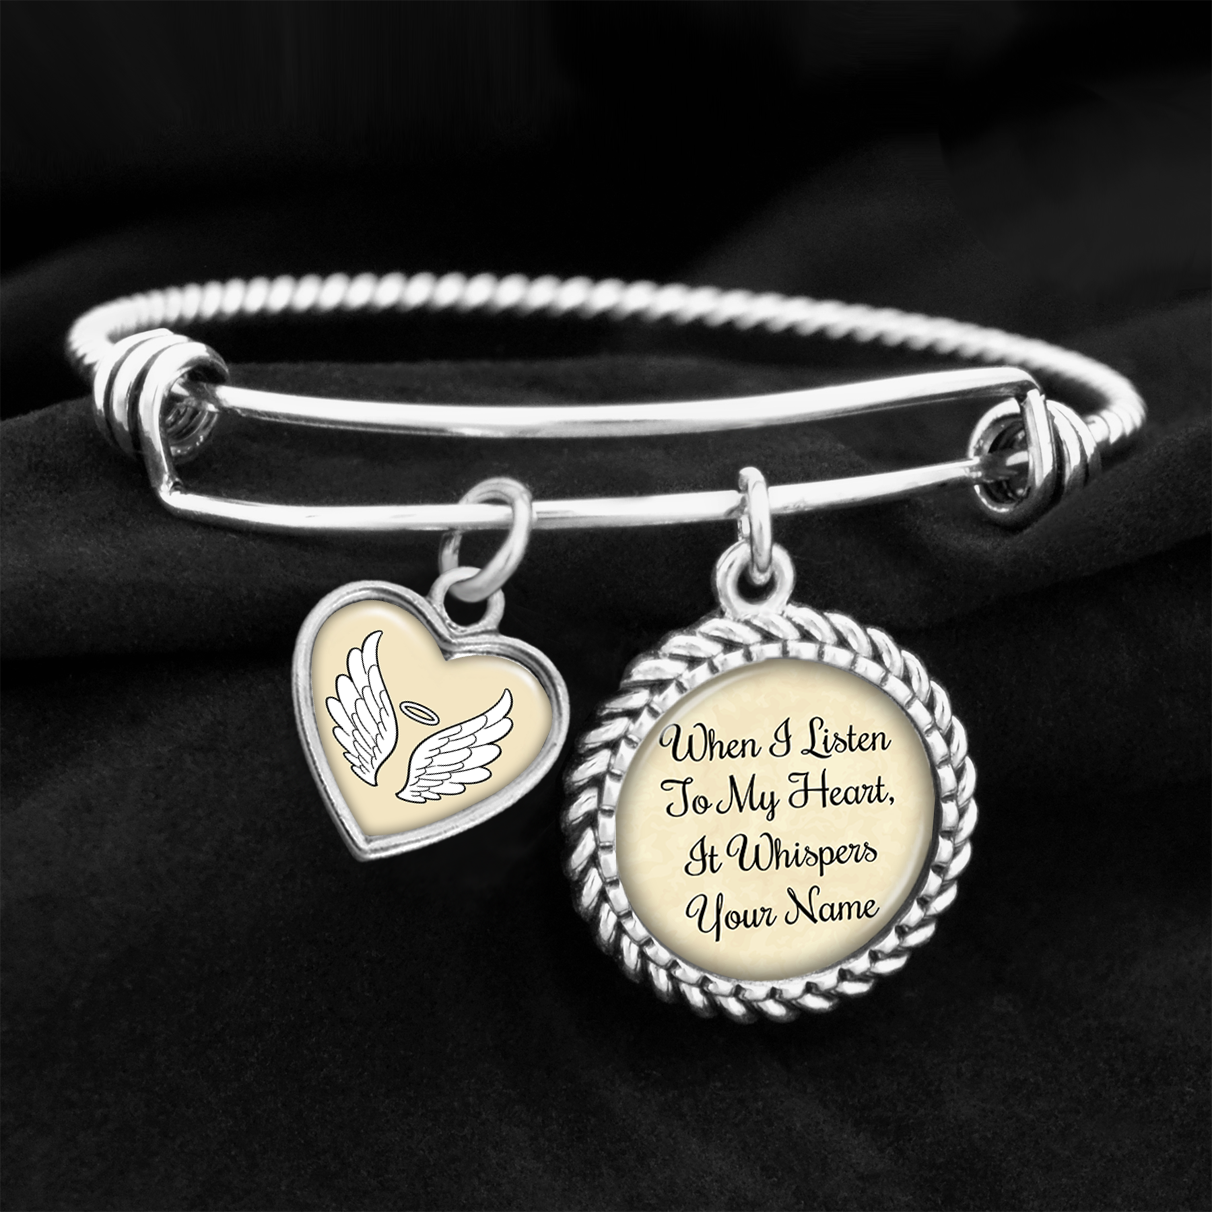 When I Listen To My Heart, It Whispers Your Name Charm Bracelet